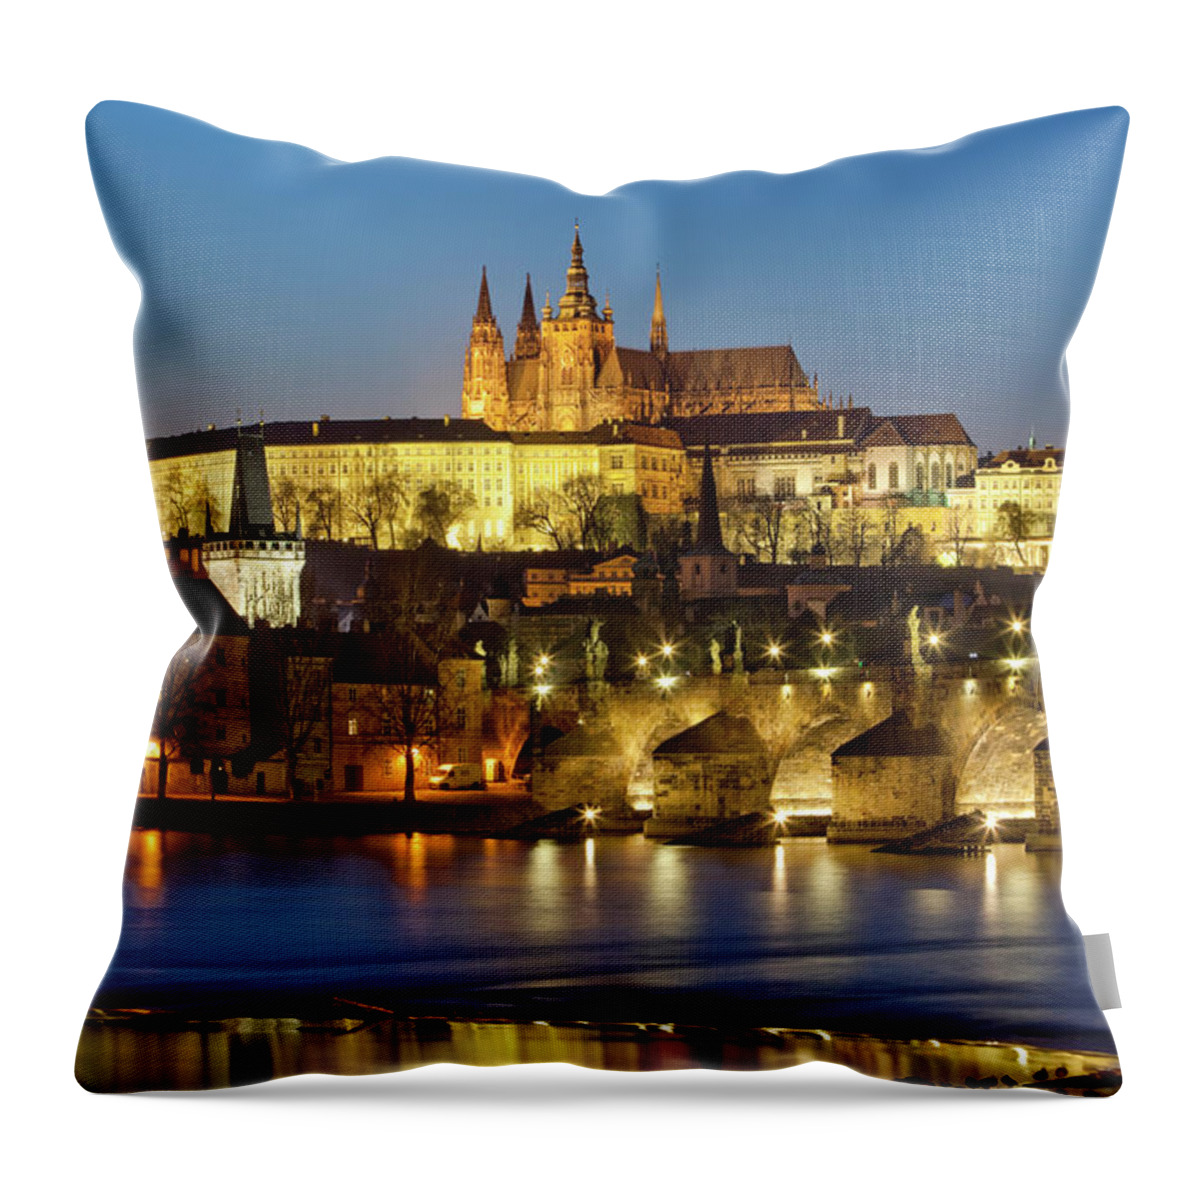 Built Structure Throw Pillow featuring the photograph Prague - Charles Bridge And Hradcany by Frank Chmura